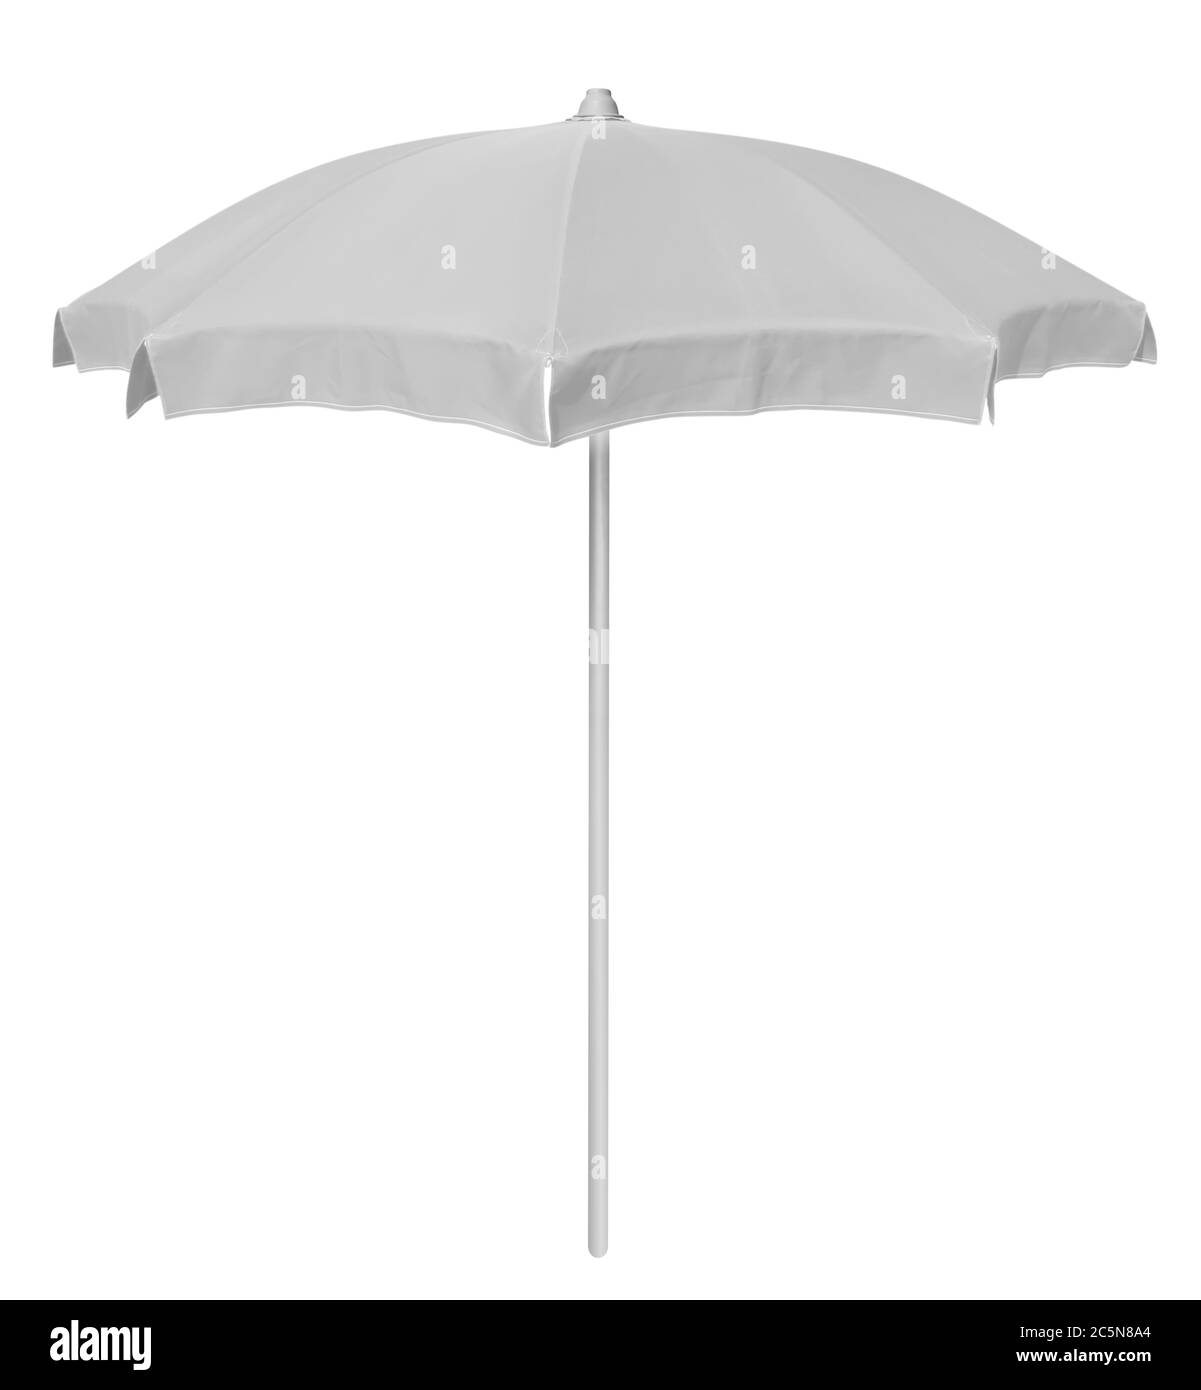 White beach umbrella isolated on white. Clipping path included. Stock Photo